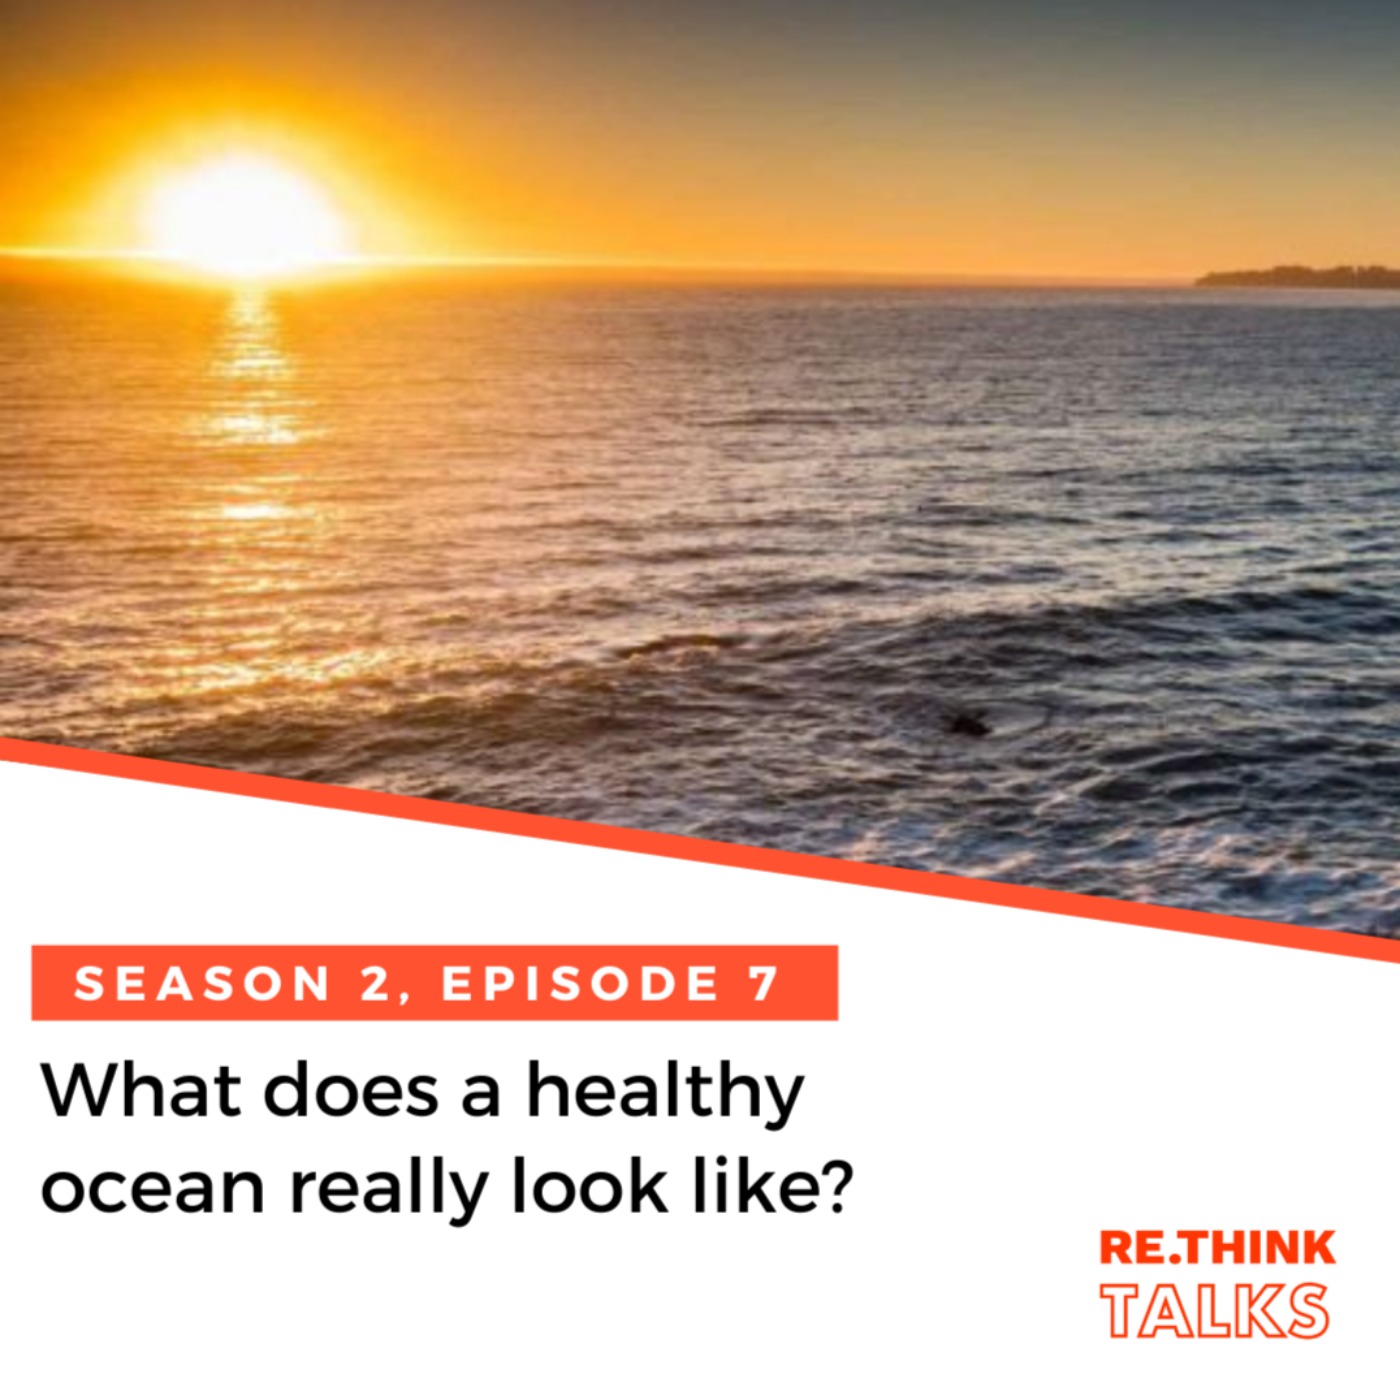 What does a healthy ocean really look like?